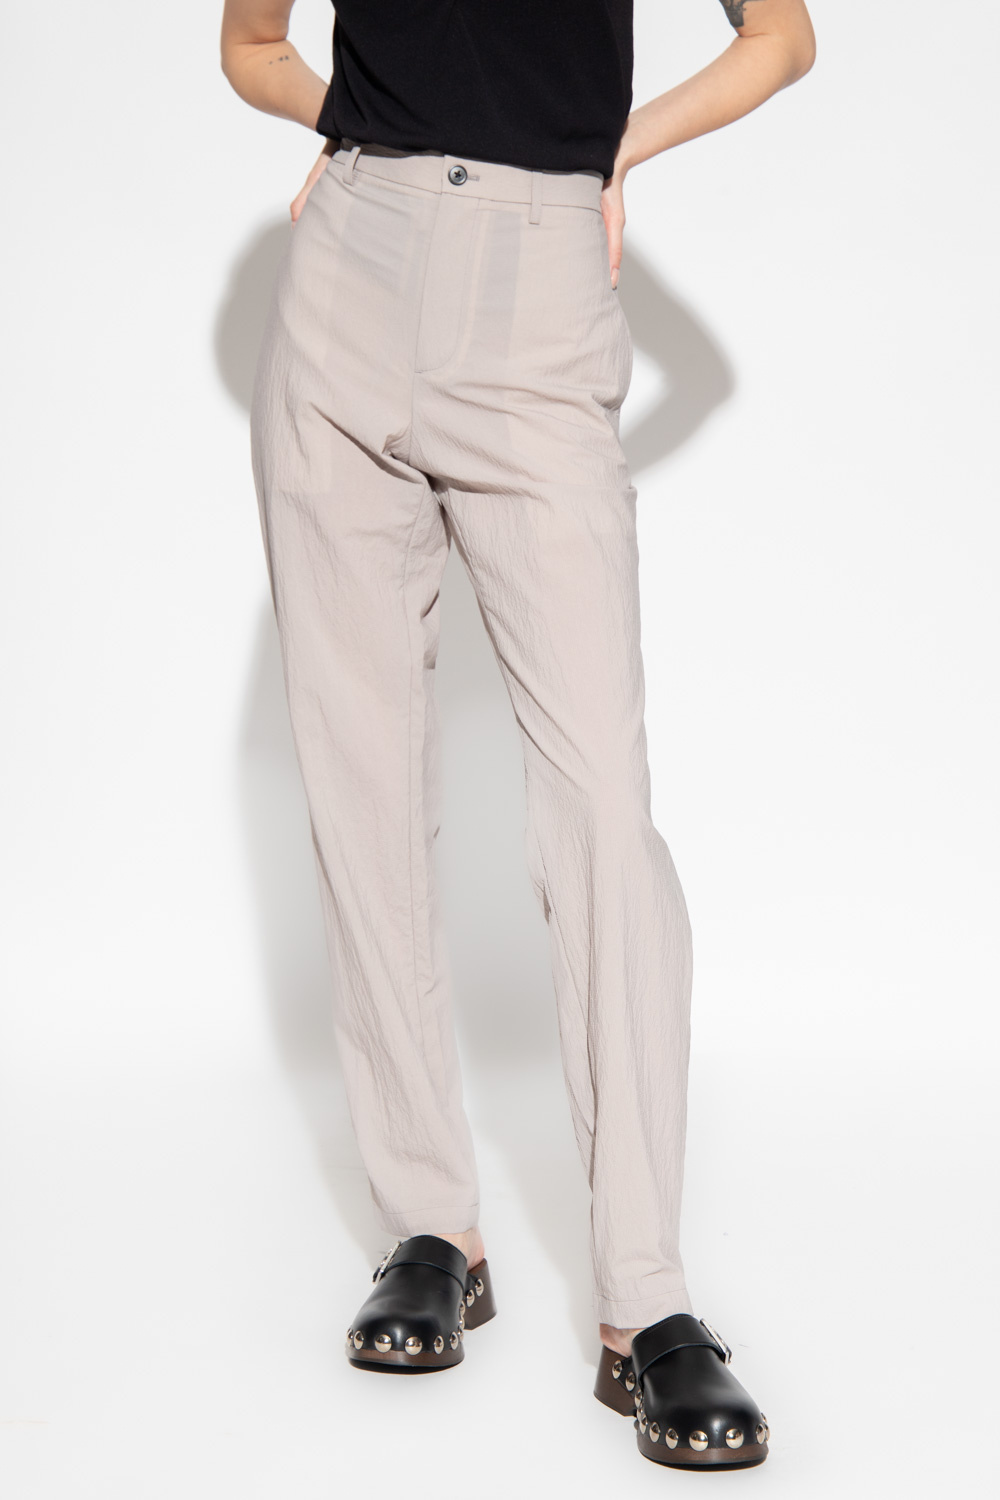 Theory Tapered Floral trousers